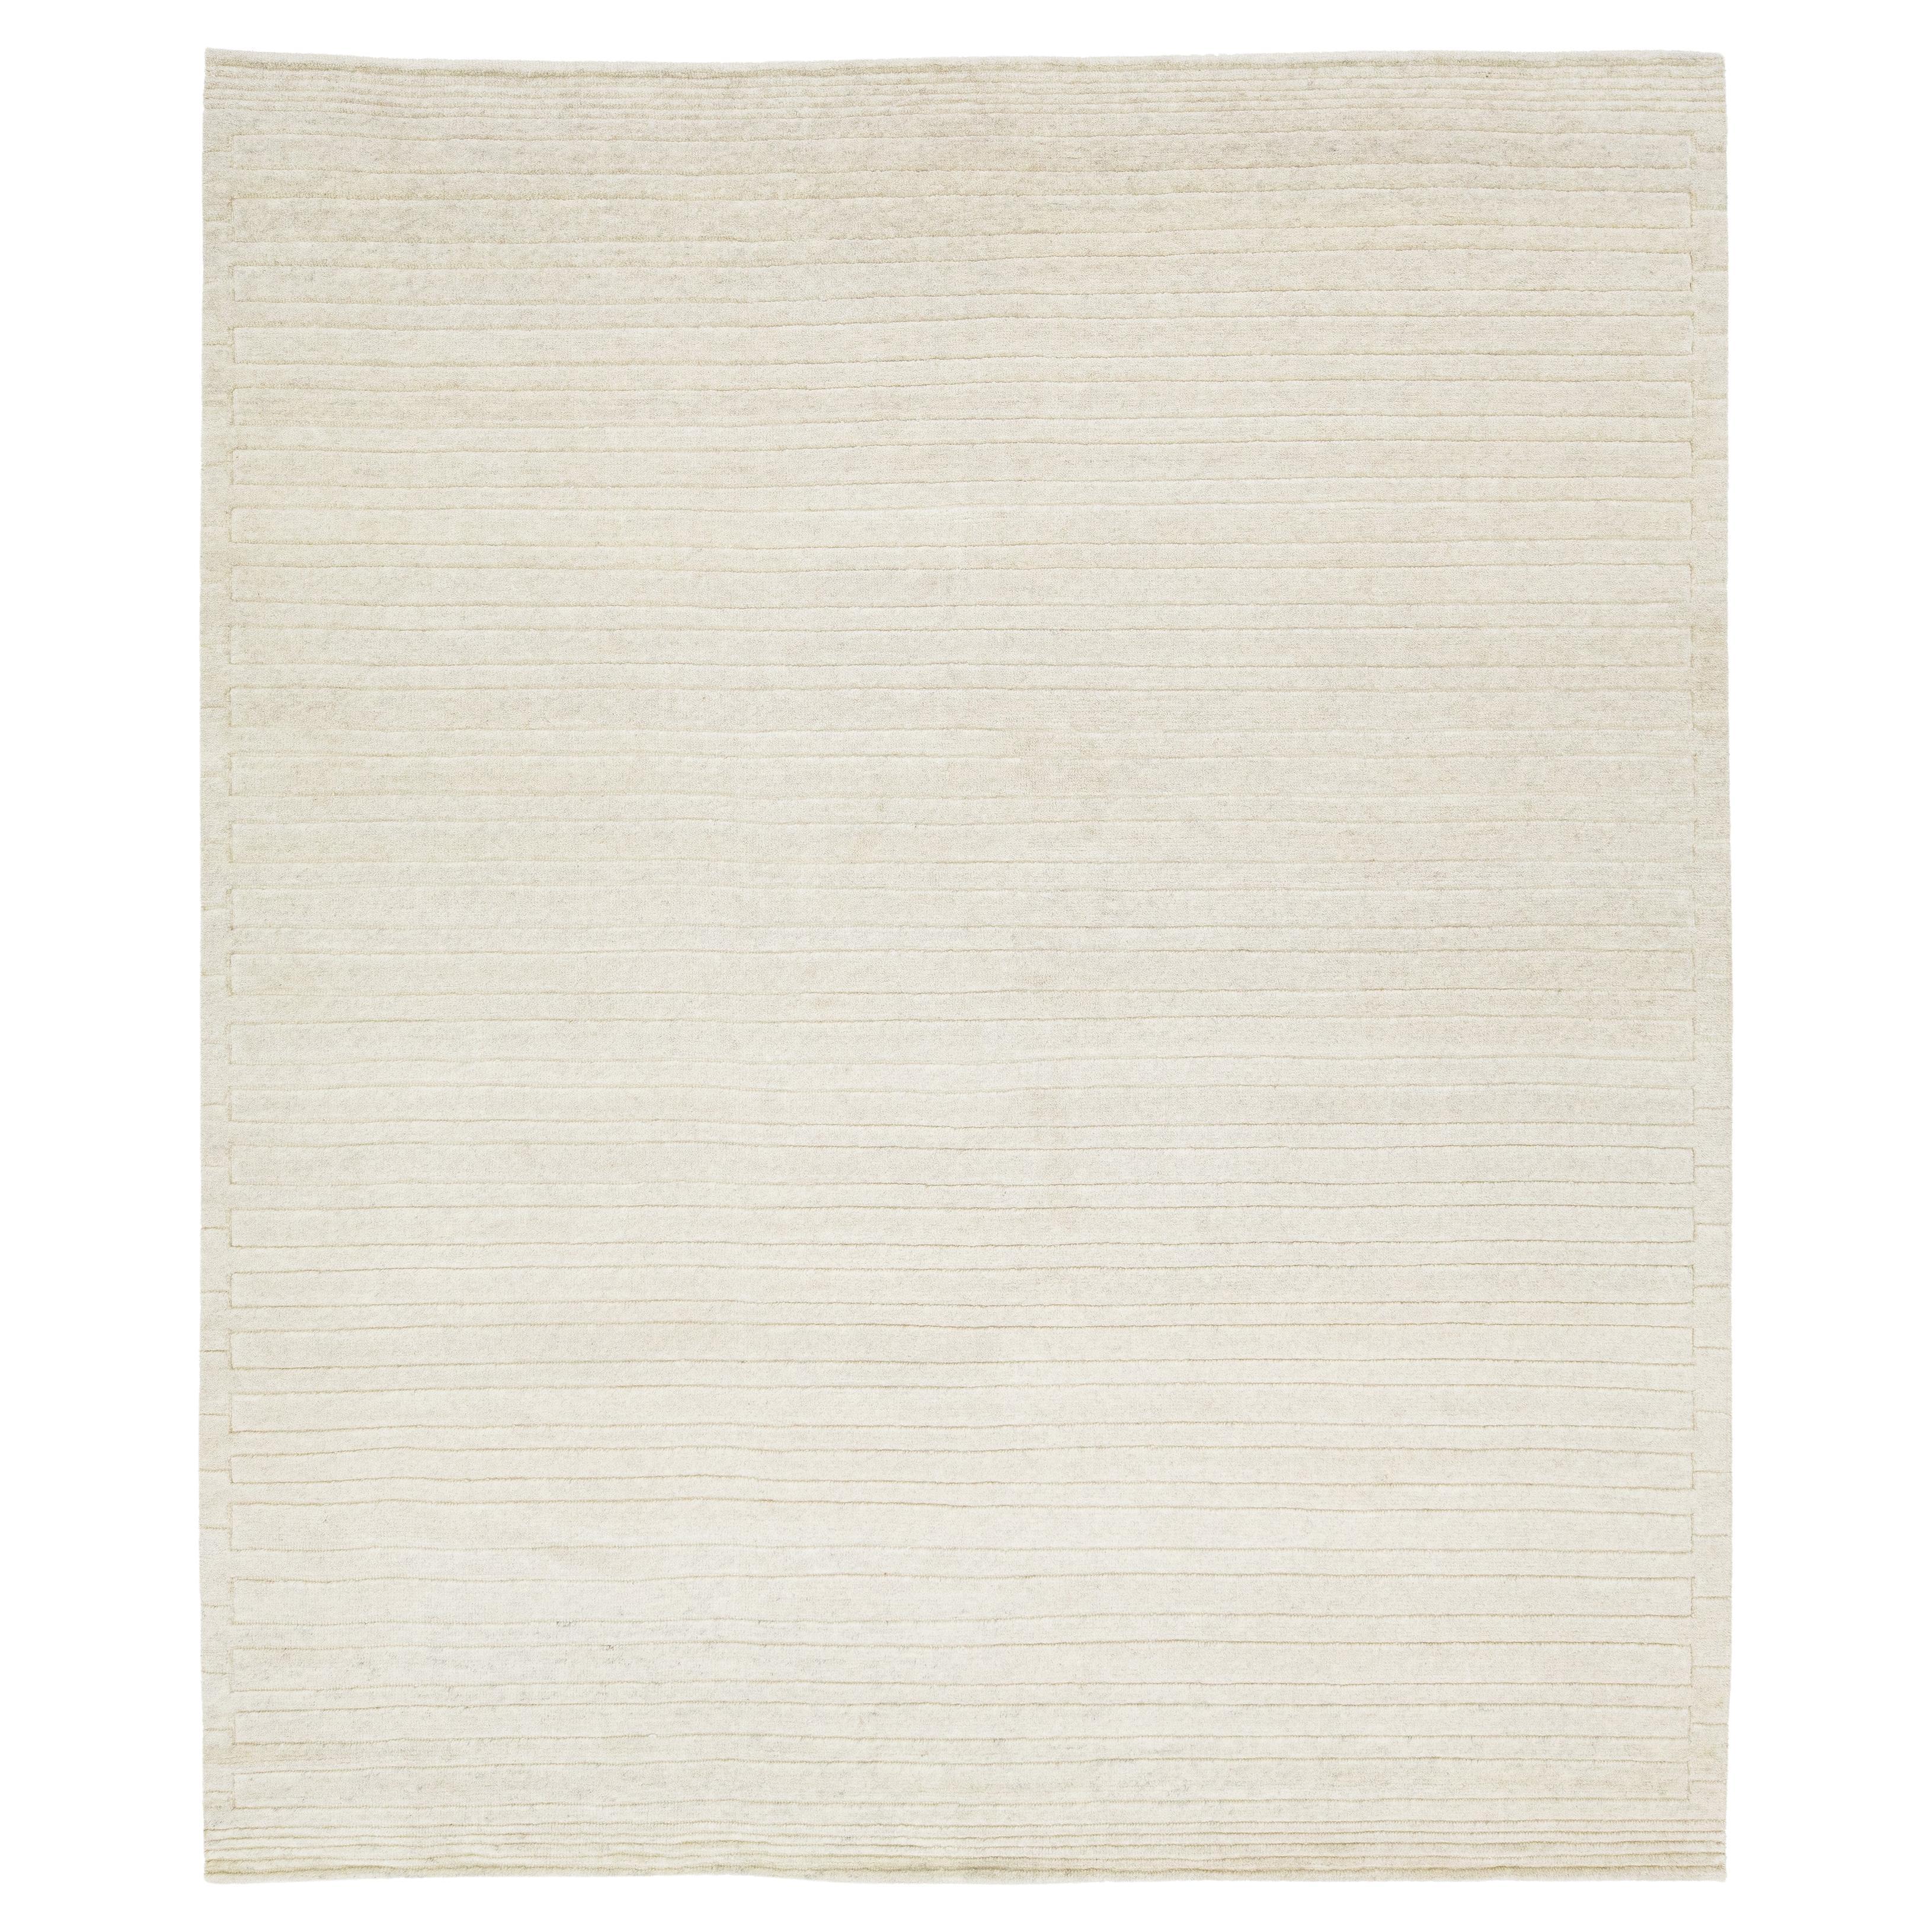 Ivory Moroccan Style Contemporary Wool Rug With a Striped Pattern By Apadana For Sale